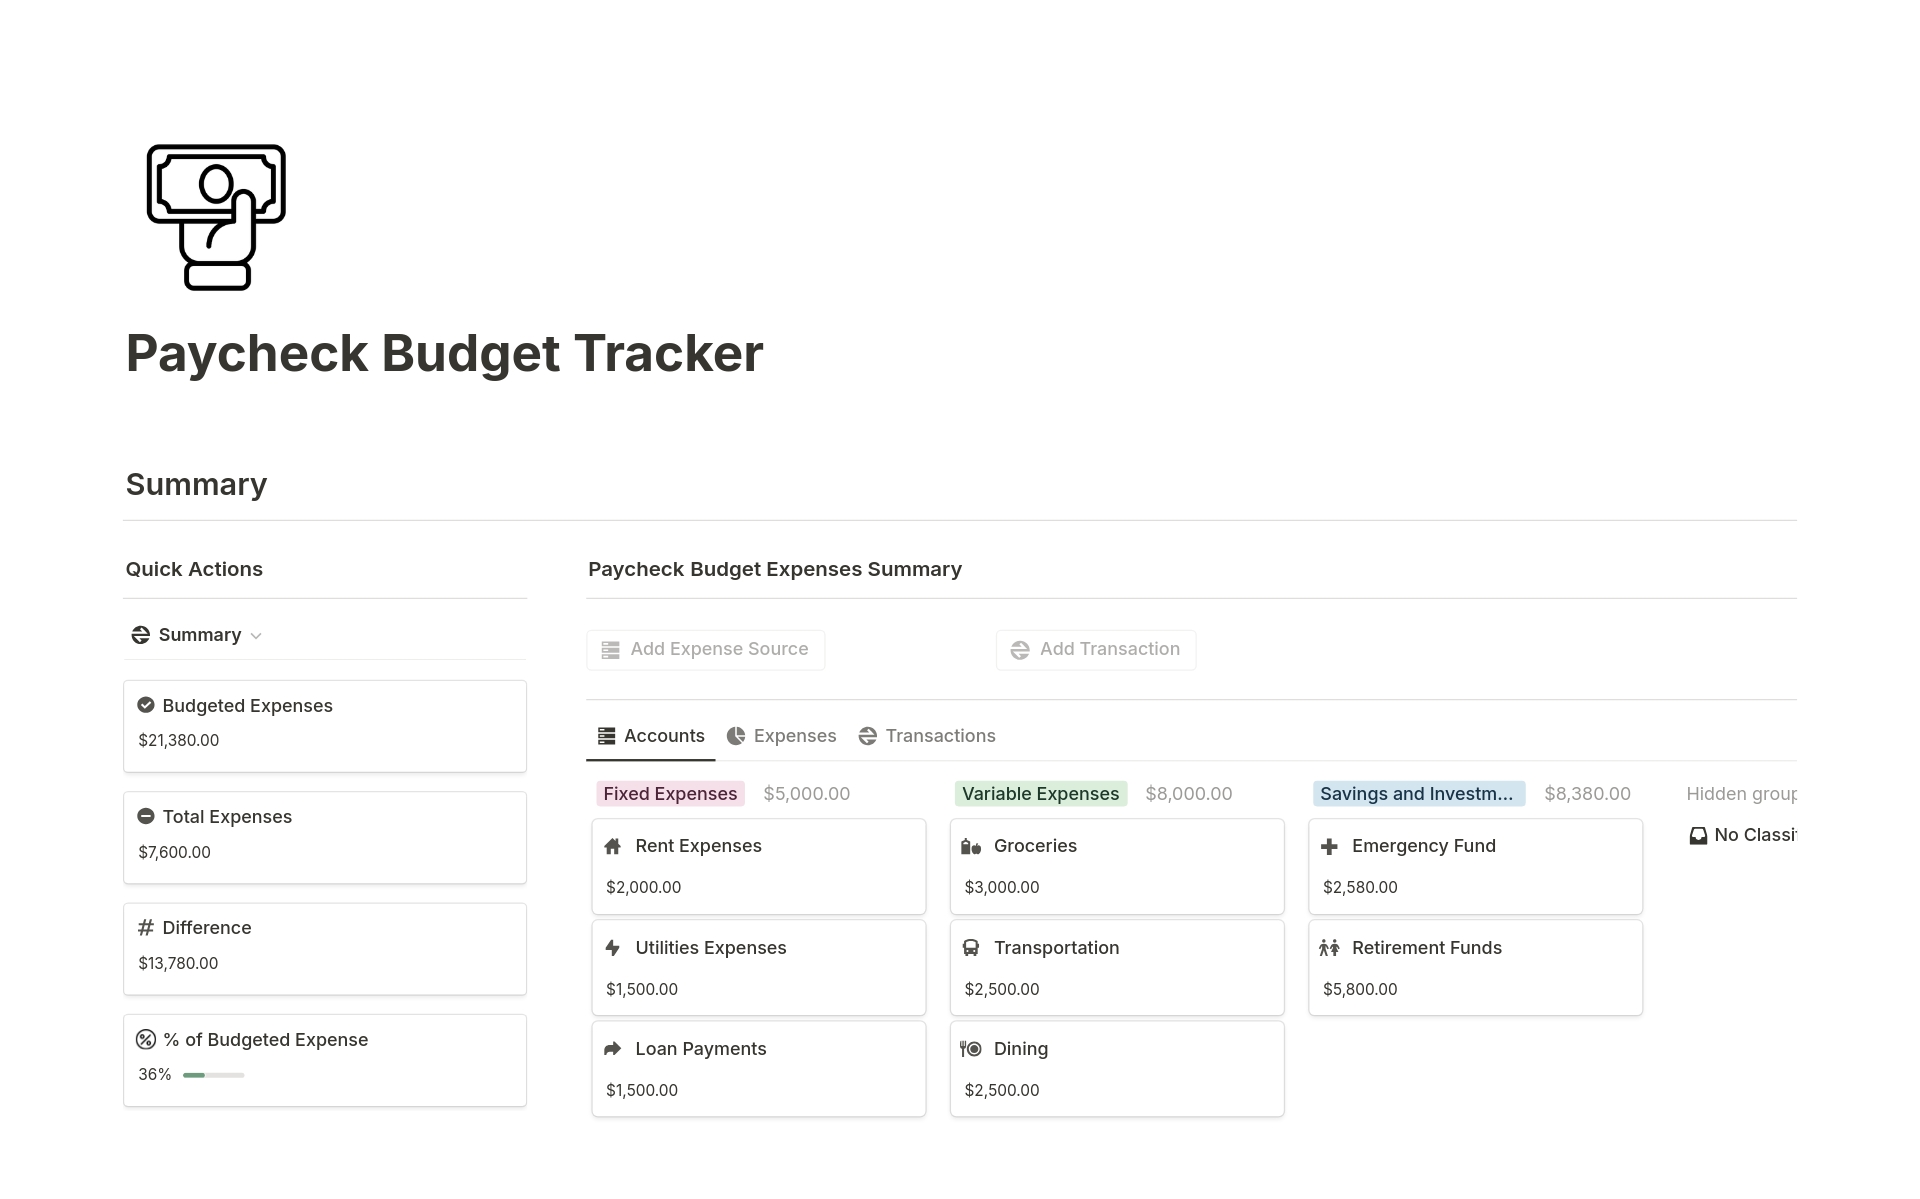 A Paycheck Budget Tracker template is used to track and manage all paycheck related budgeting needs. It covers fixed expenses, variable expenses, savings and investments and much more. With the help of the template you will be able to achieve financial stability and achieve your 